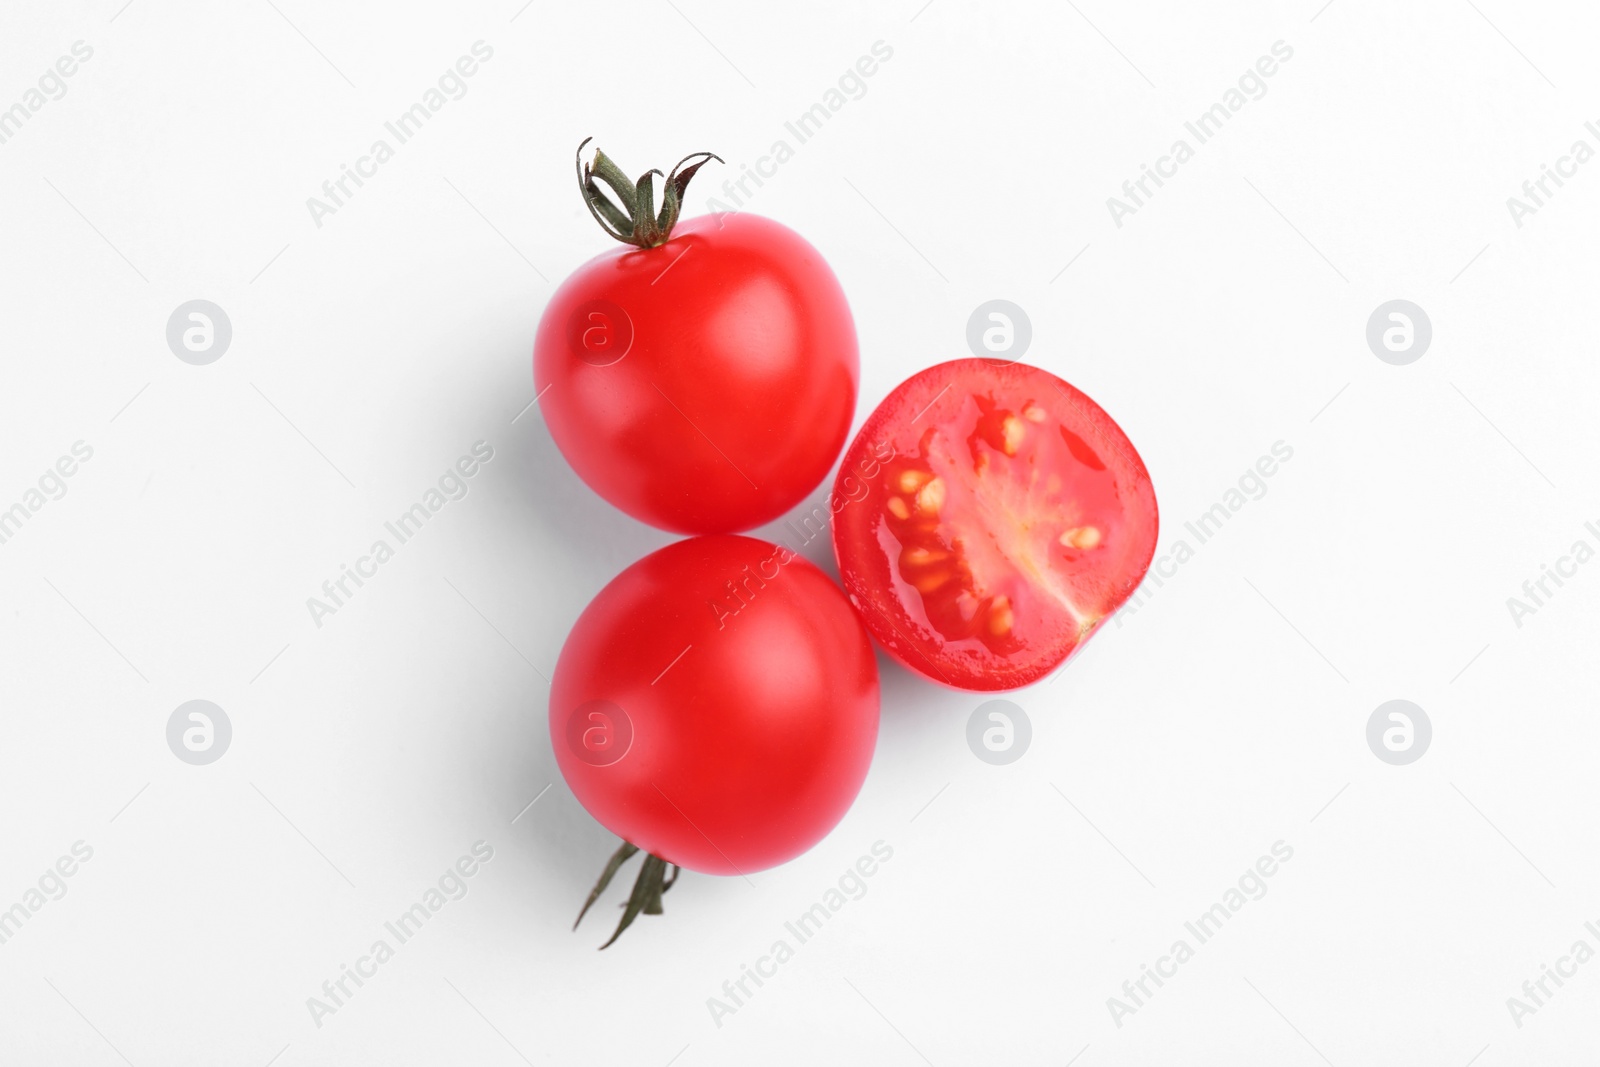 Photo of Whole and cut ripe tomatoes on white background, top view